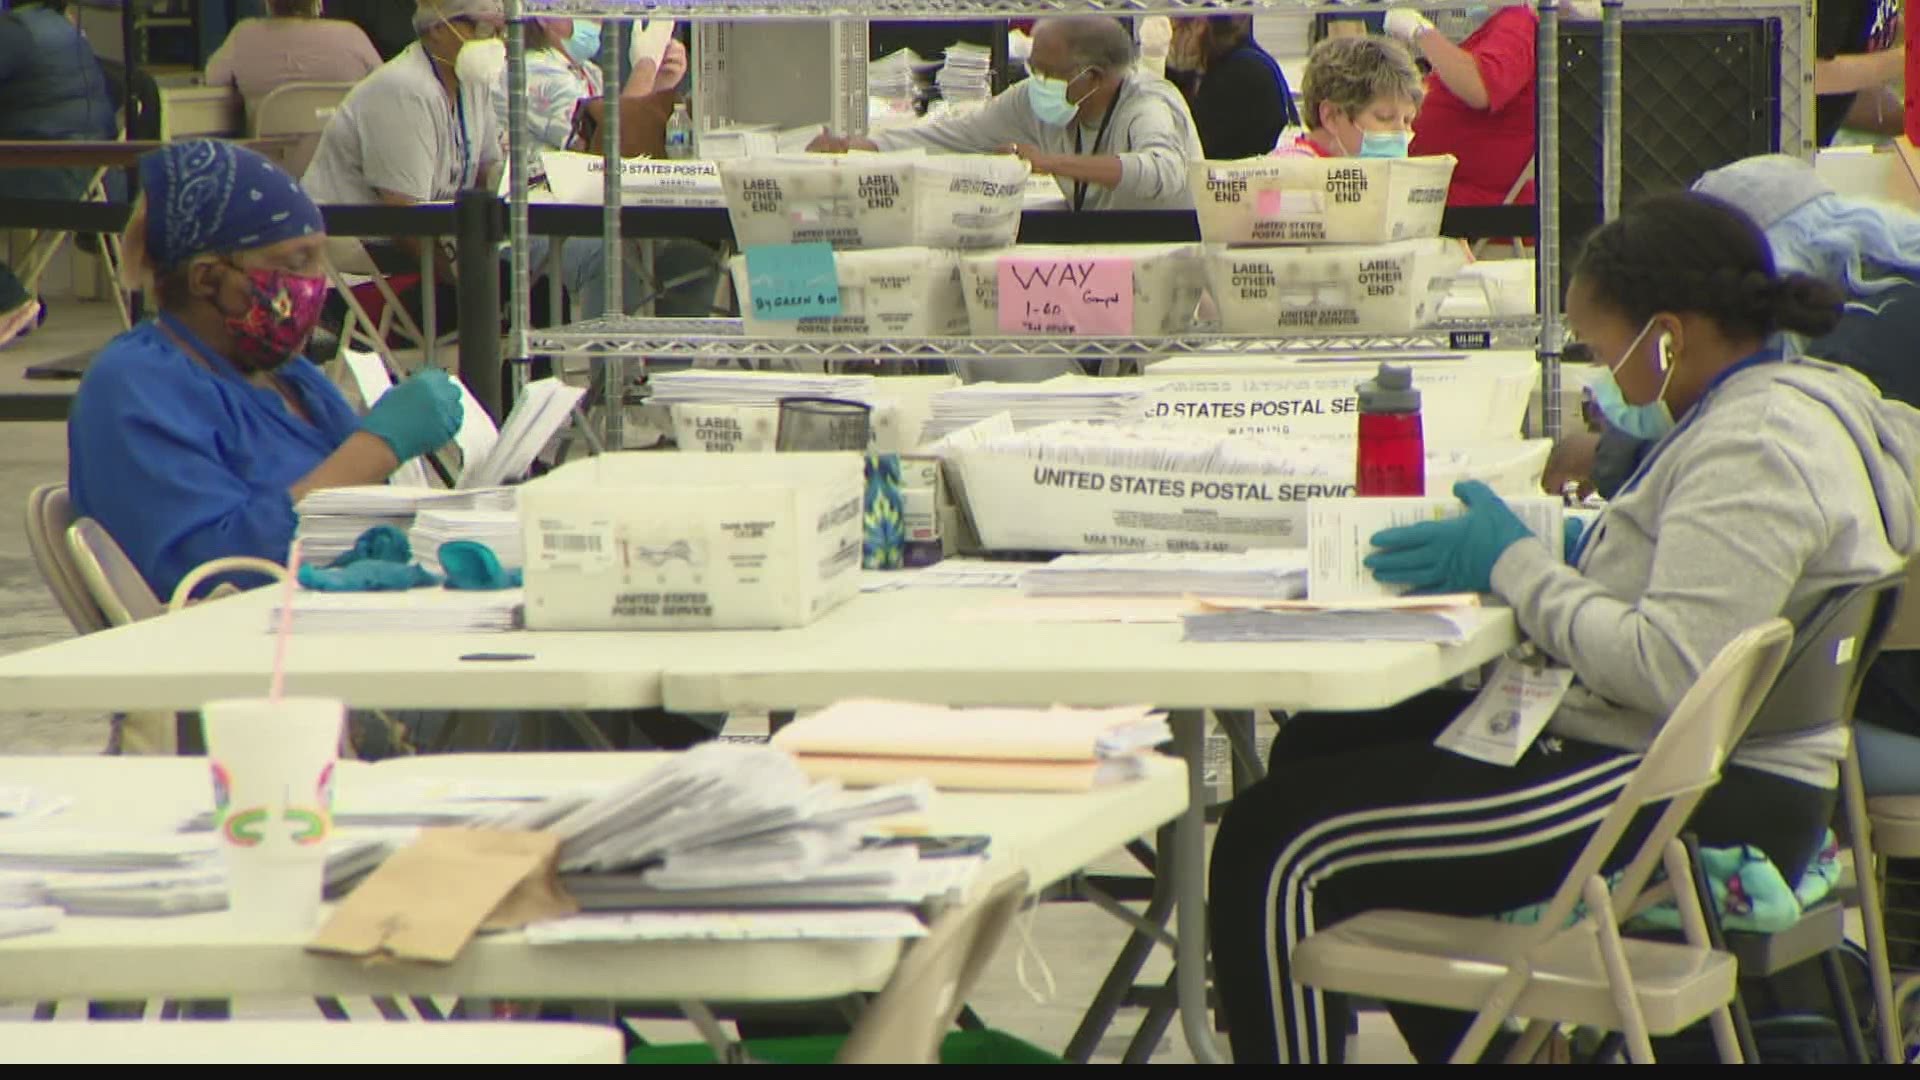 The Indiana Election Commission heard a proposal to permit more mail-in voting amid the pandemic.